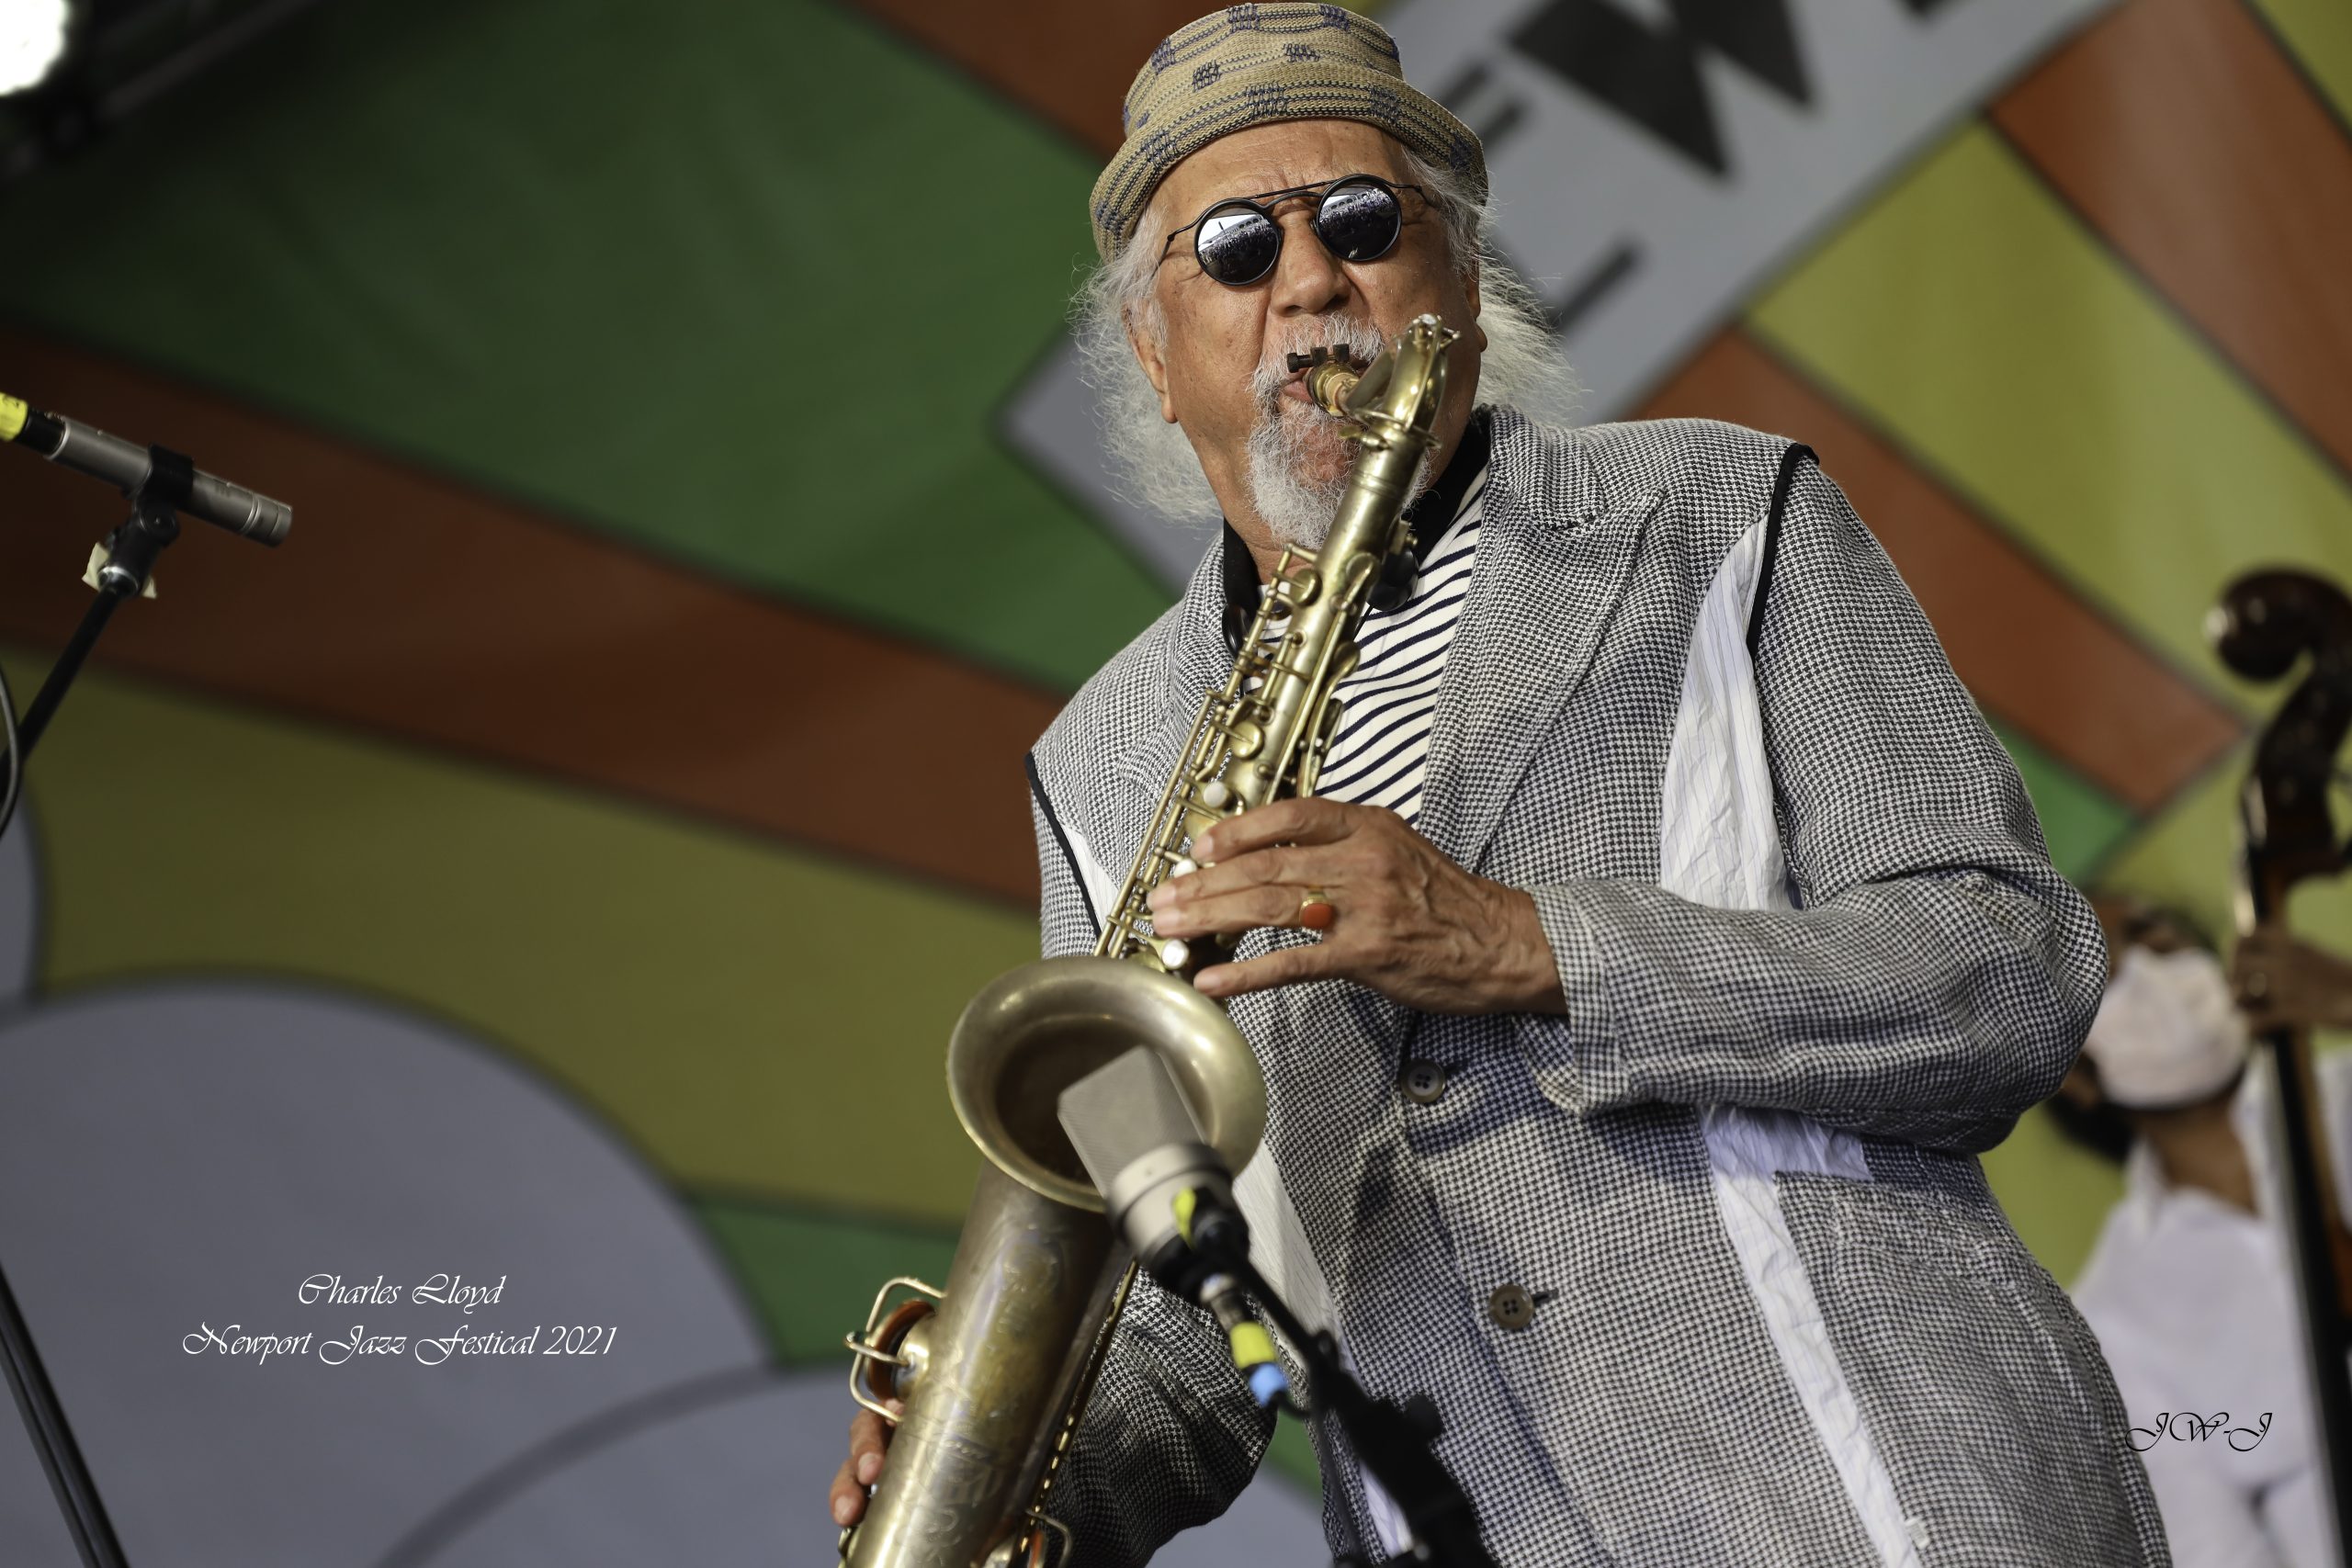 Saxophonist Charles Lloyd performing on tenor saxophone, colorful stage display behind him at the Newport Jazz Festival